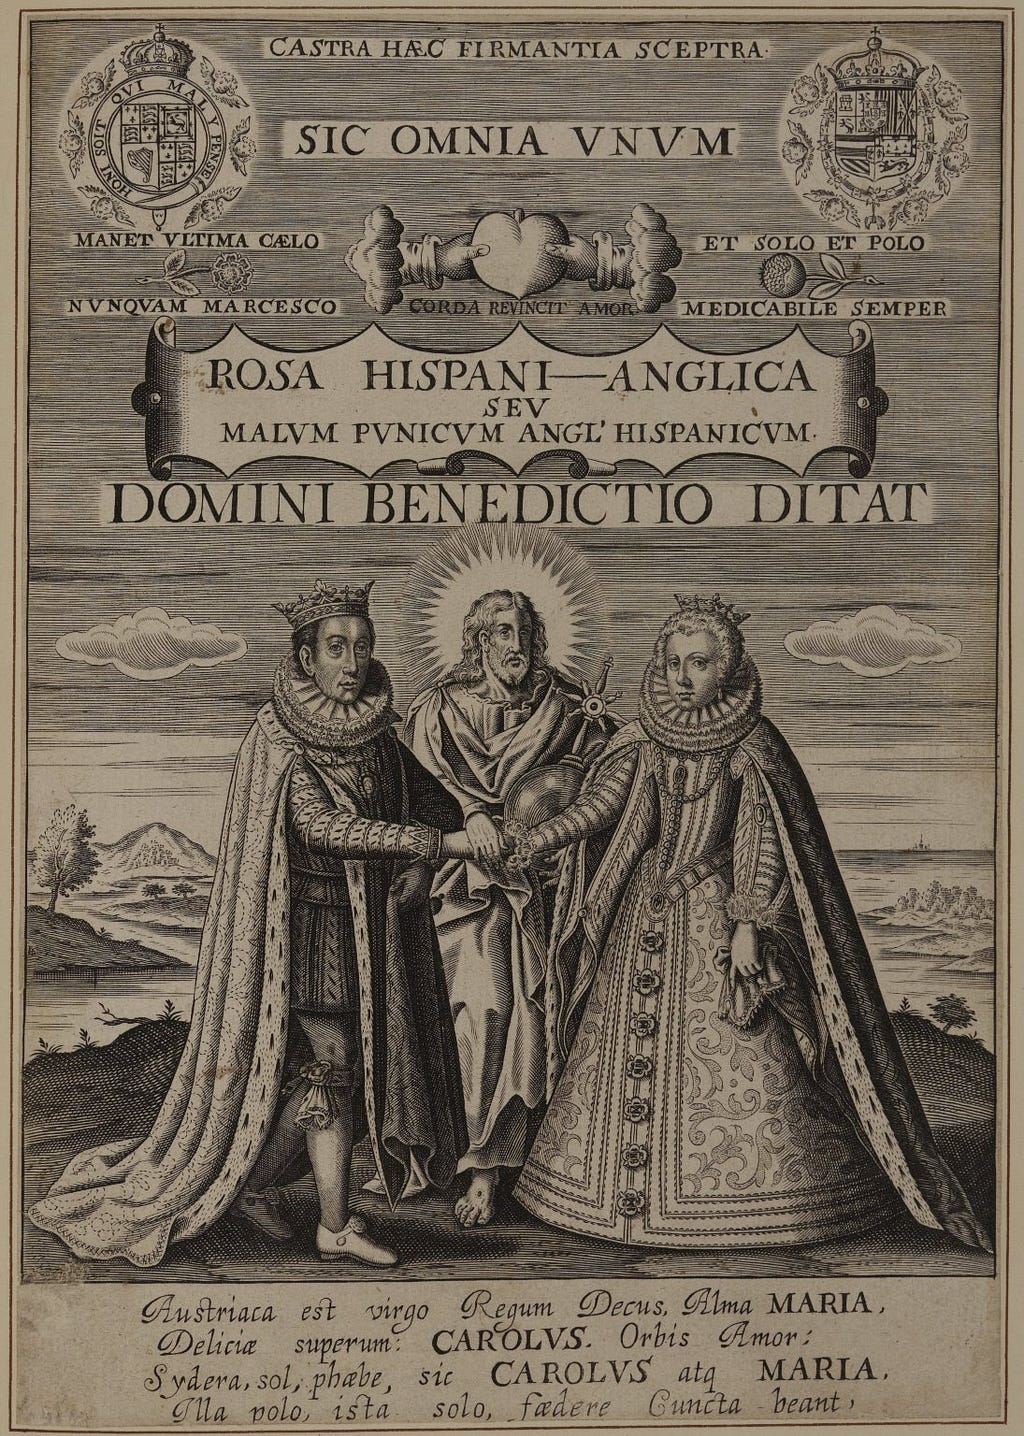 The King and Queen with Jesus. The top of the document has royal sigil’s while the main focus of the document is the illustration of a royal couple with Jesus. There is latin writing all the way through the document.